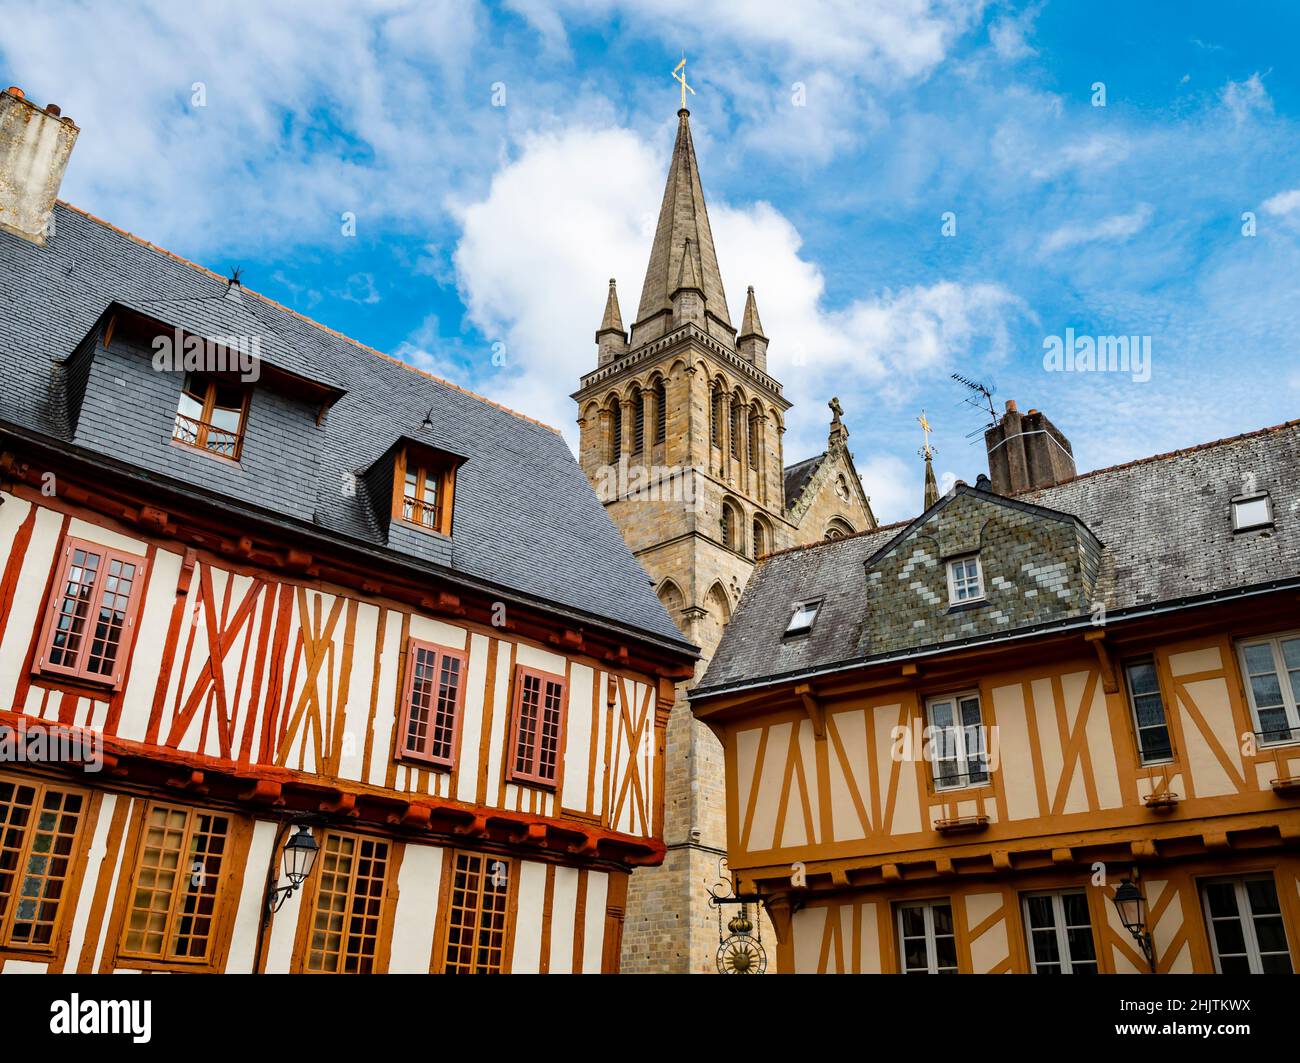 Colorful old wooden houses and St. Peter's Basilica in the historical center of Vannes, coastal medieveal town in Morbihan departement, Brittany, Fran Stock Photo